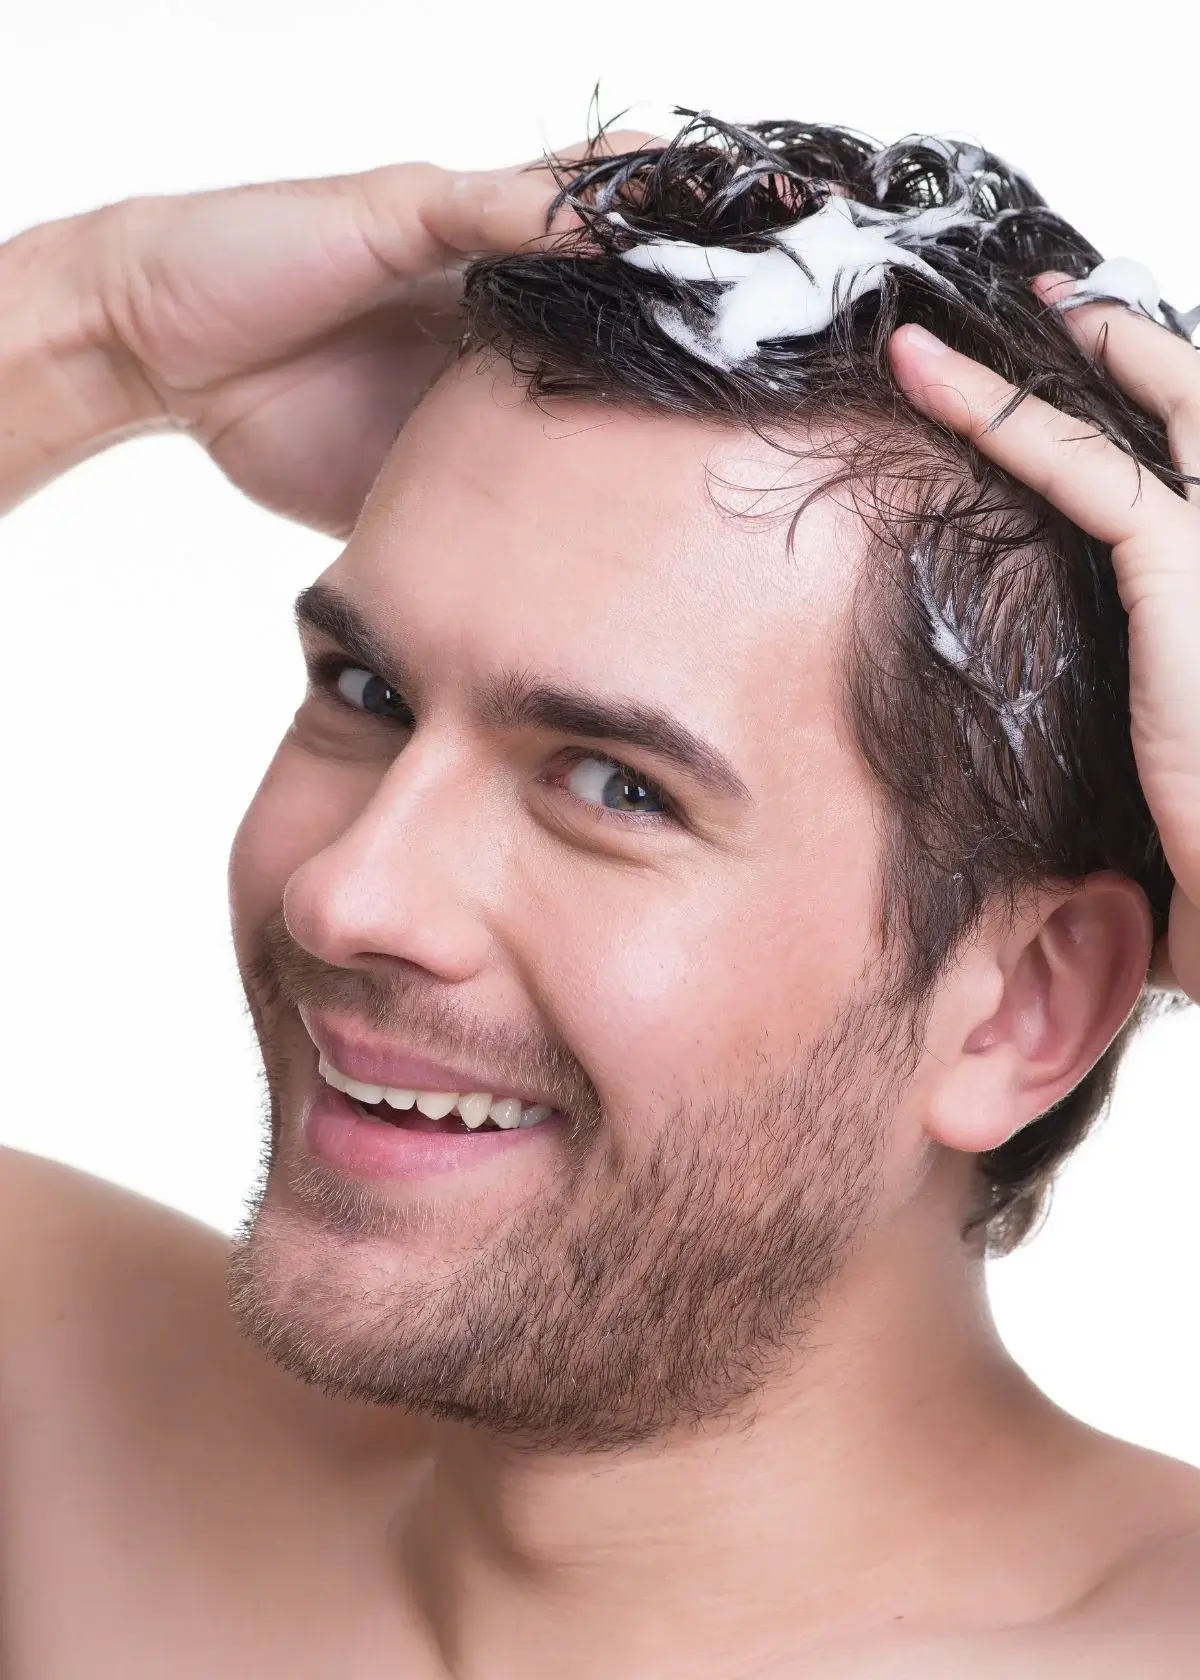 How to choose the right hair loss shampoo for men?